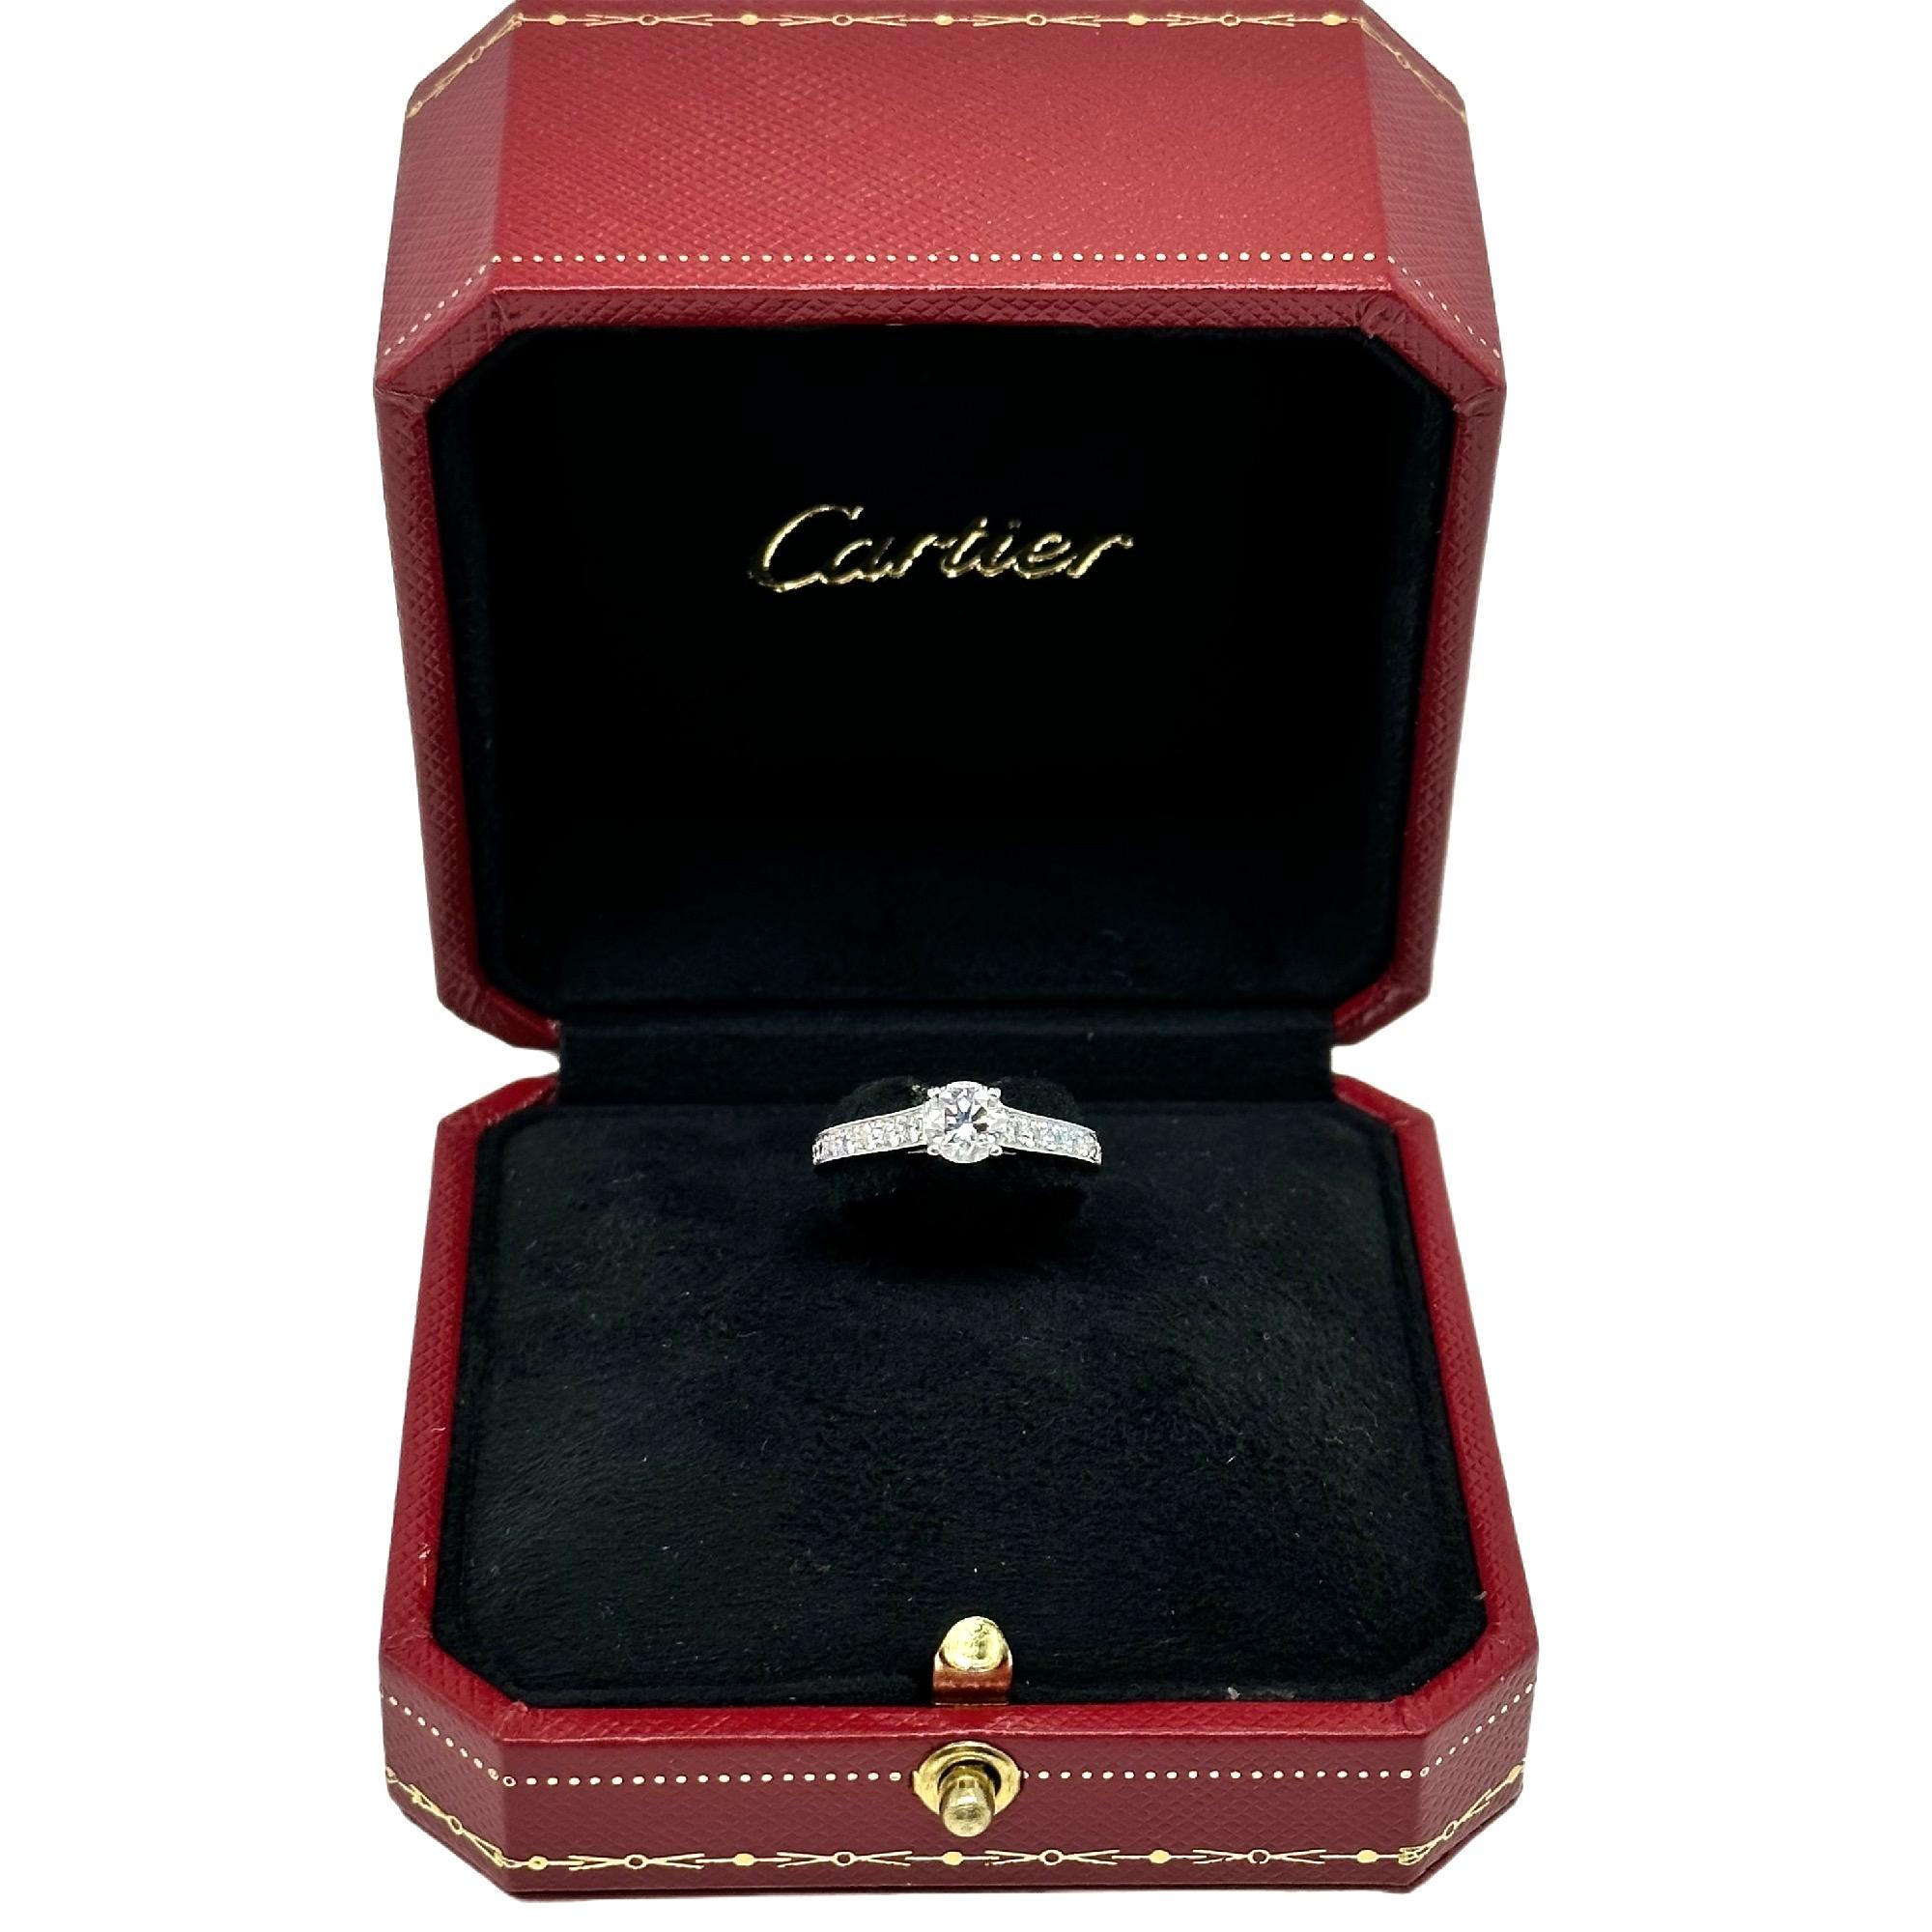 Cartier 1895 Round Diamond 0.88 tcw Engagement Ring in Platinum GIA COA Box In Excellent Condition For Sale In San Diego, CA